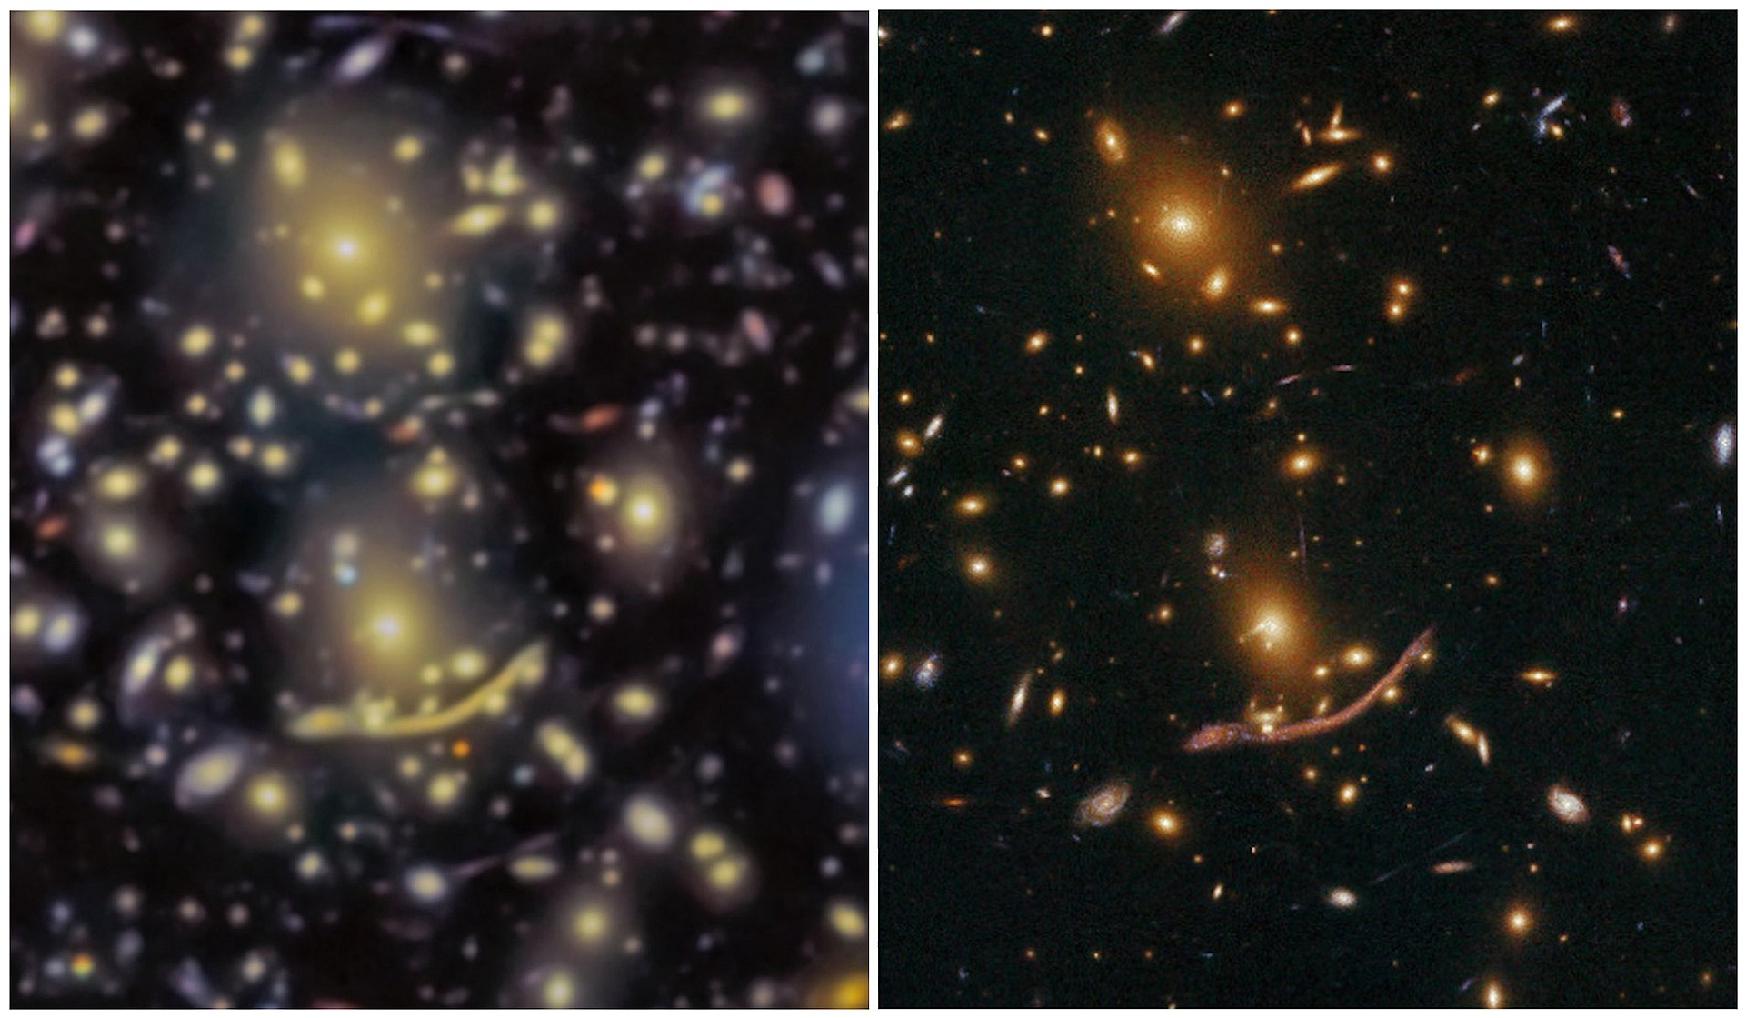 Figure 7: This image compares the center of the cluster as seen with the GTC (left) and with the Hubble Space Telescope (right). The data from the HST have better spatial resolution because they are not affected by the turbulence in the atmosphere. The data from the GTC are even deeper, showing the existence of some galaxies previously unknown and not detected by the HST (image credit: GTC/HST)